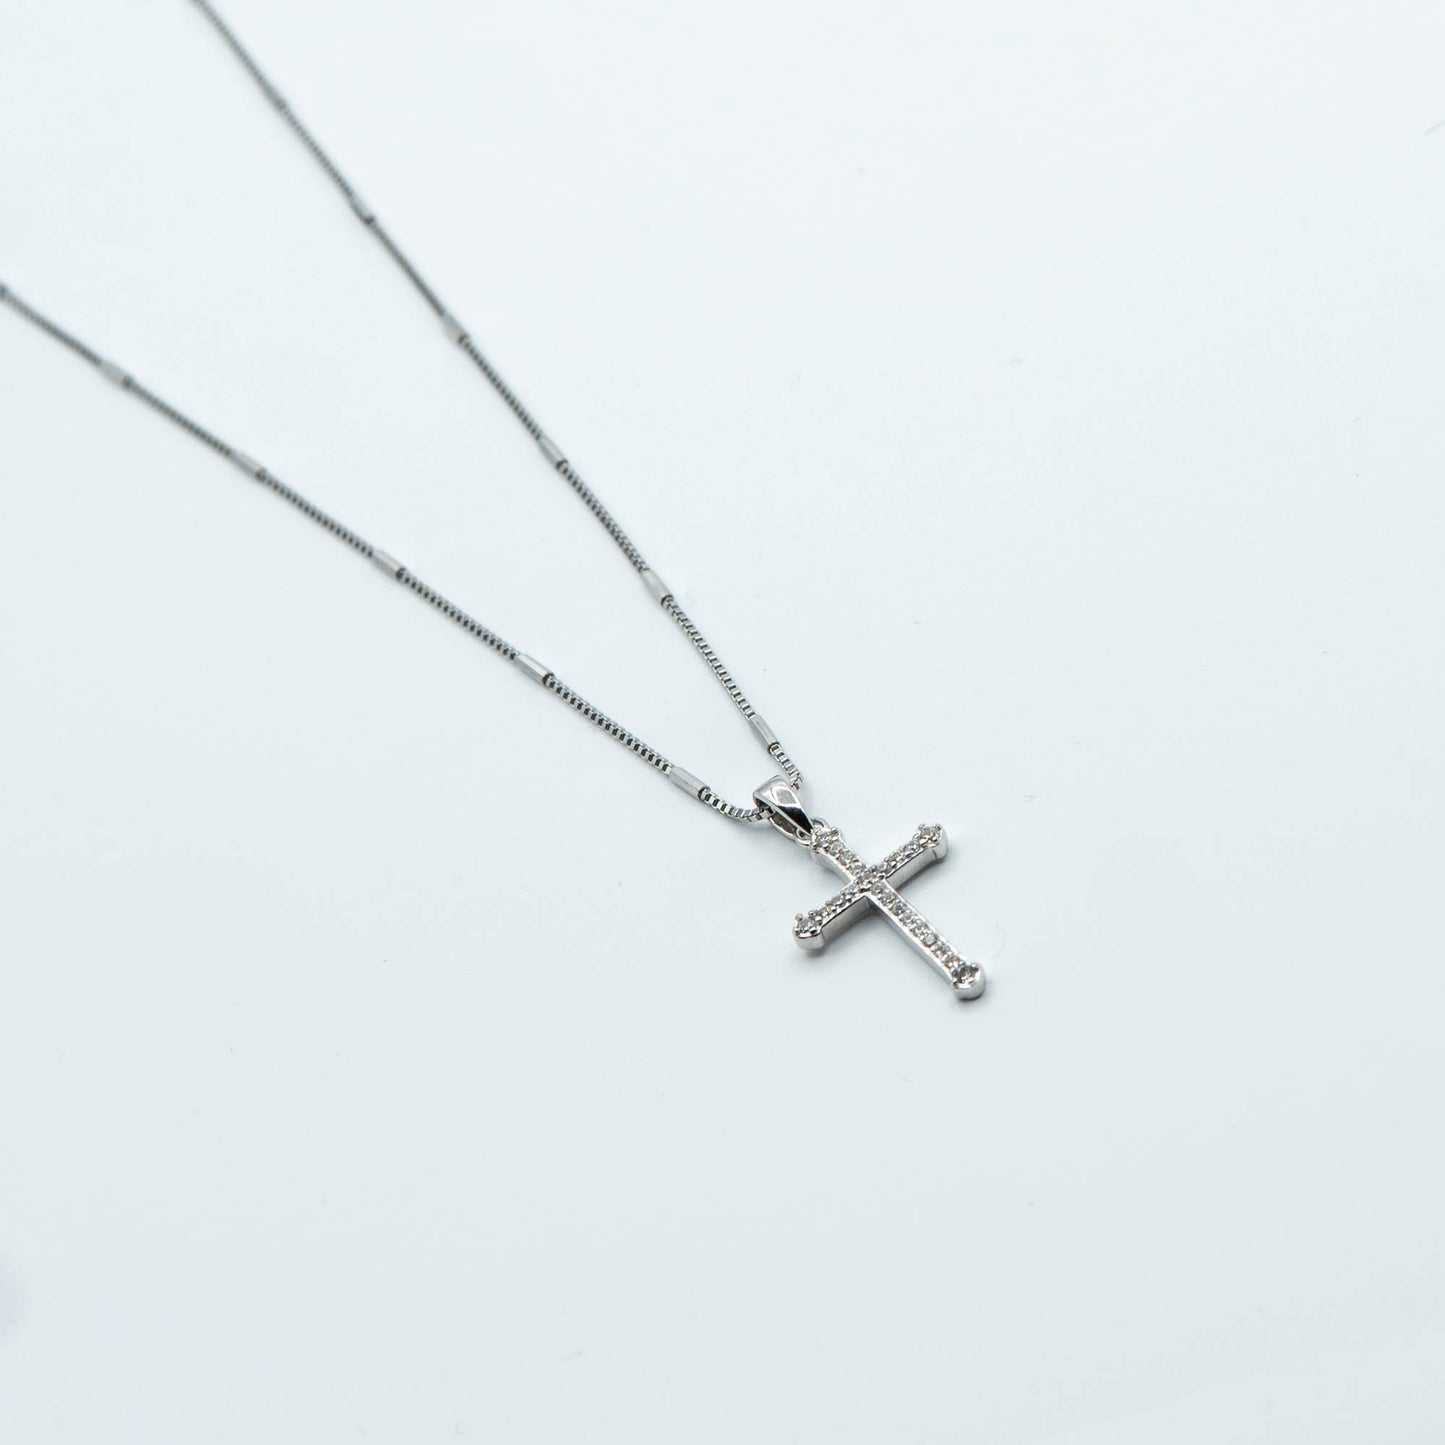 DK-925-458- Micropave cross necklace